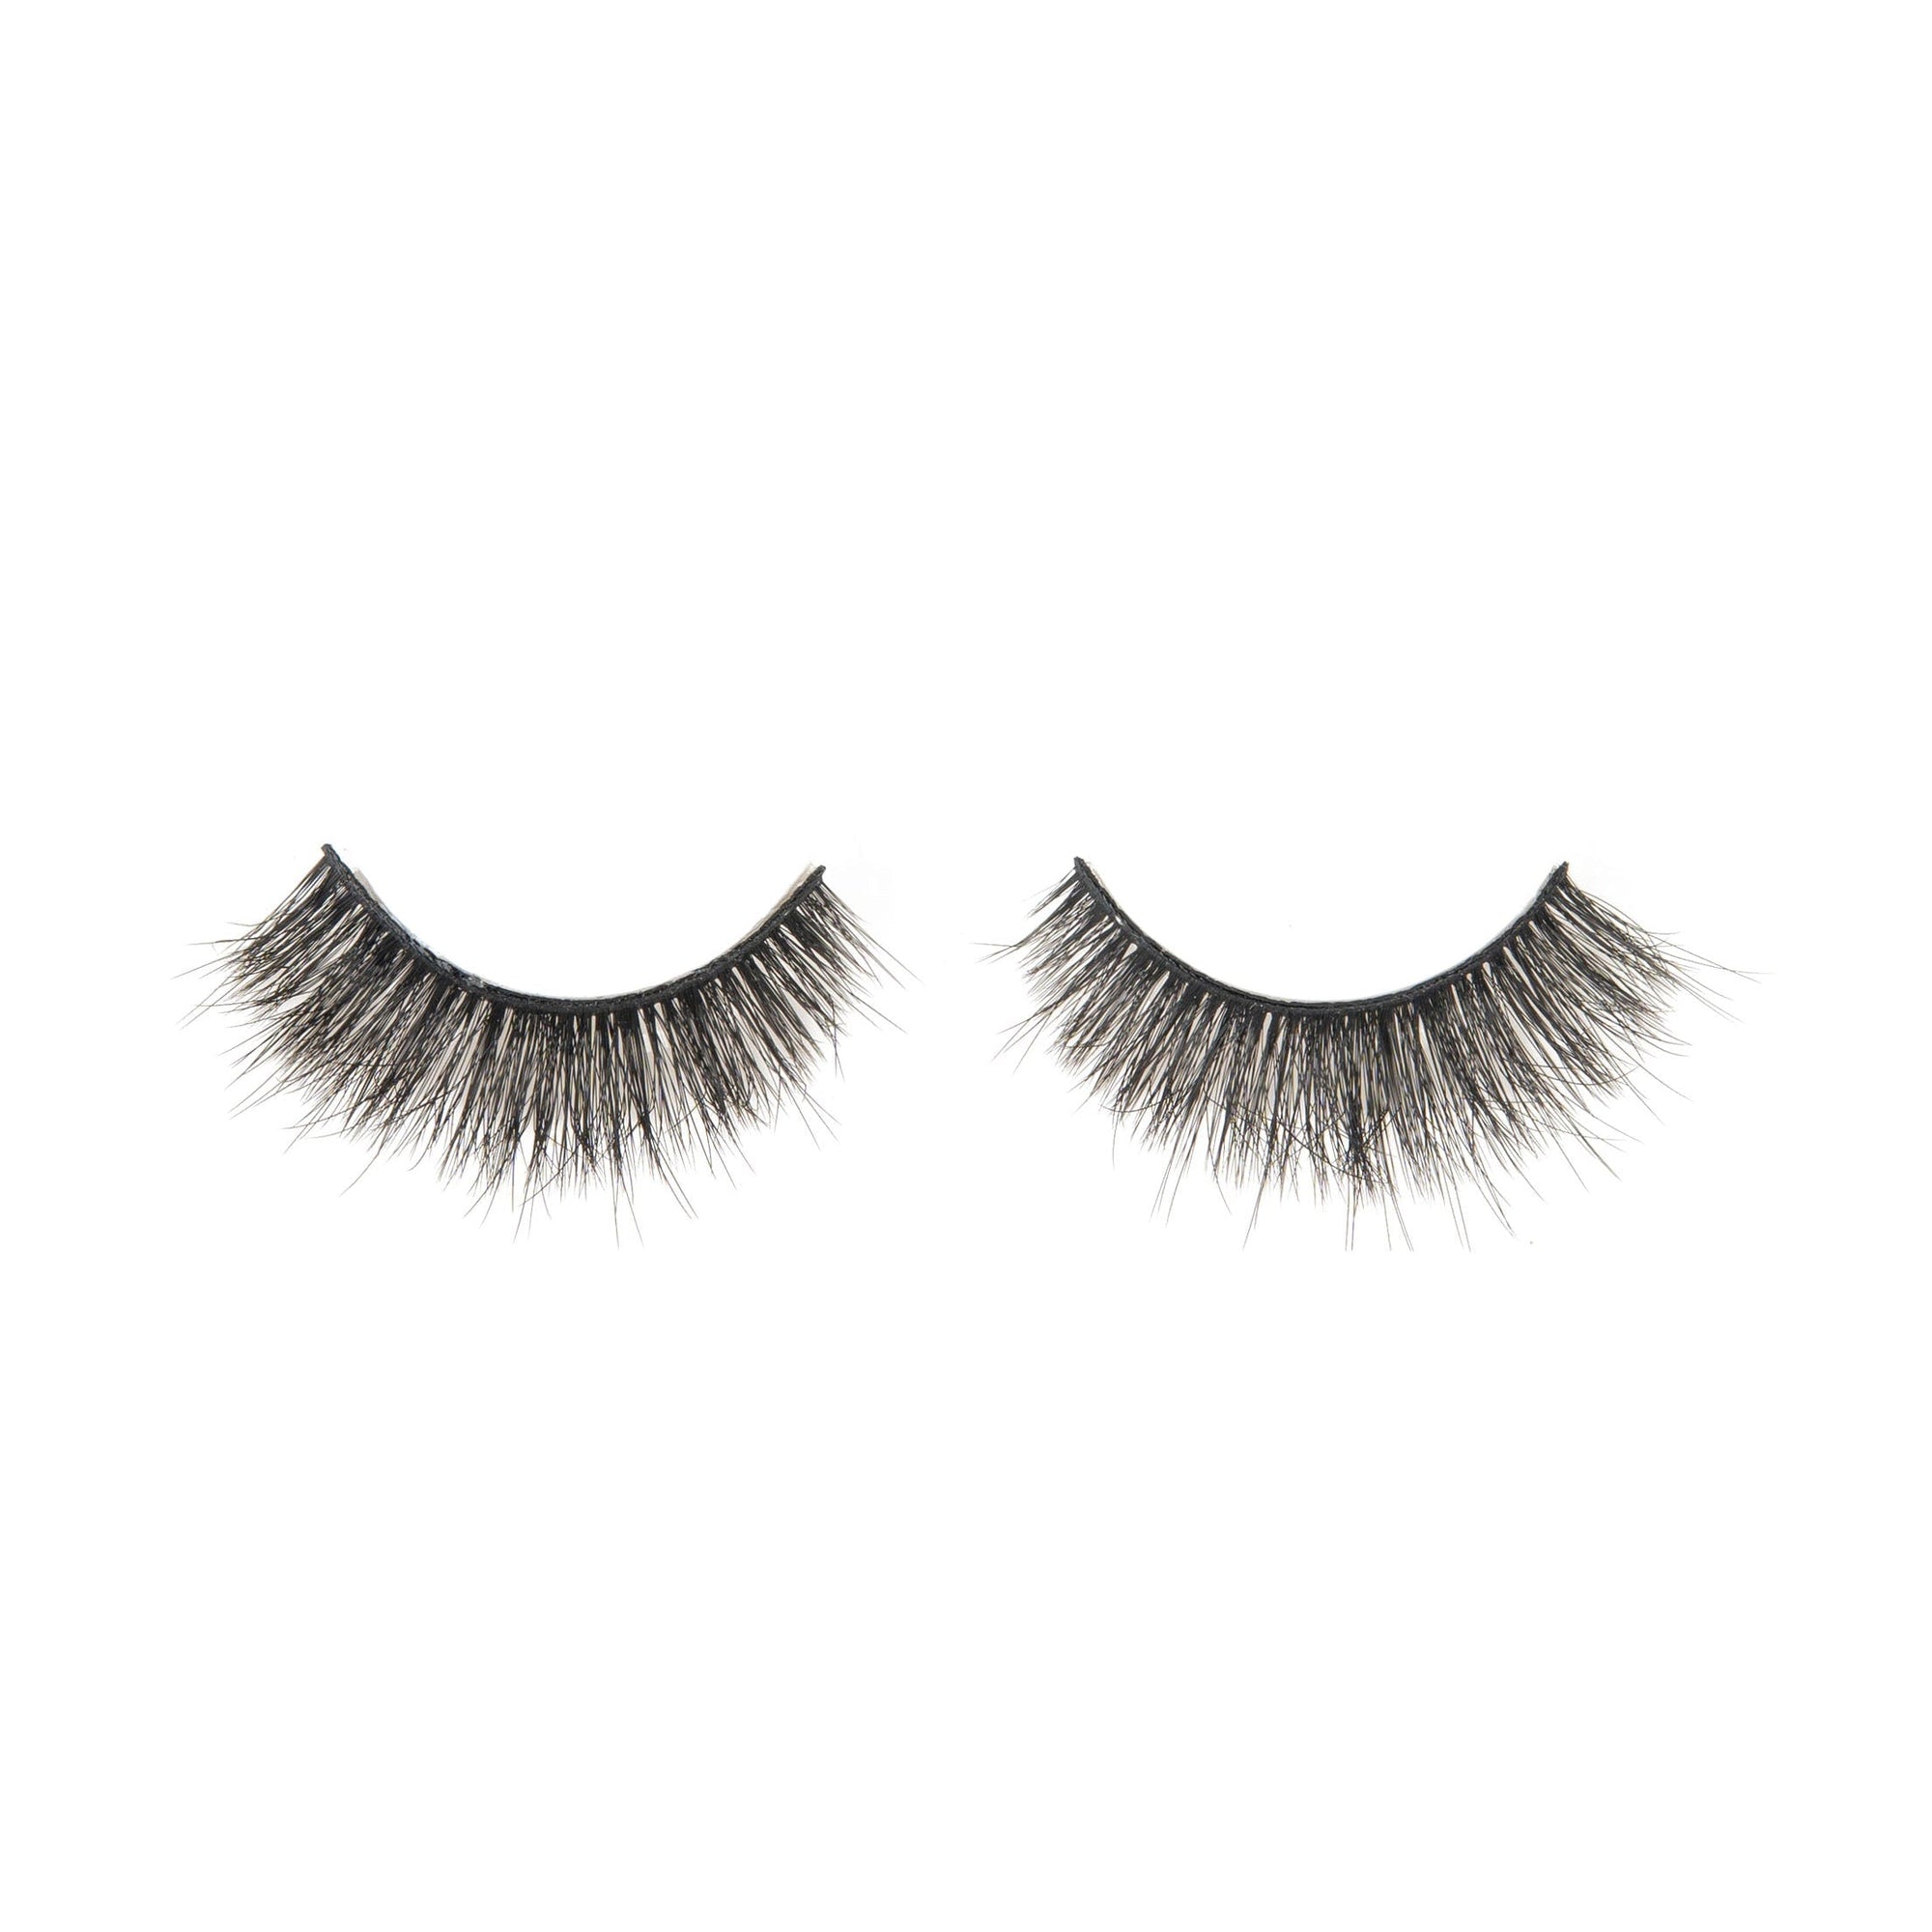 Eye Candy Signature Lash Collection Mimi